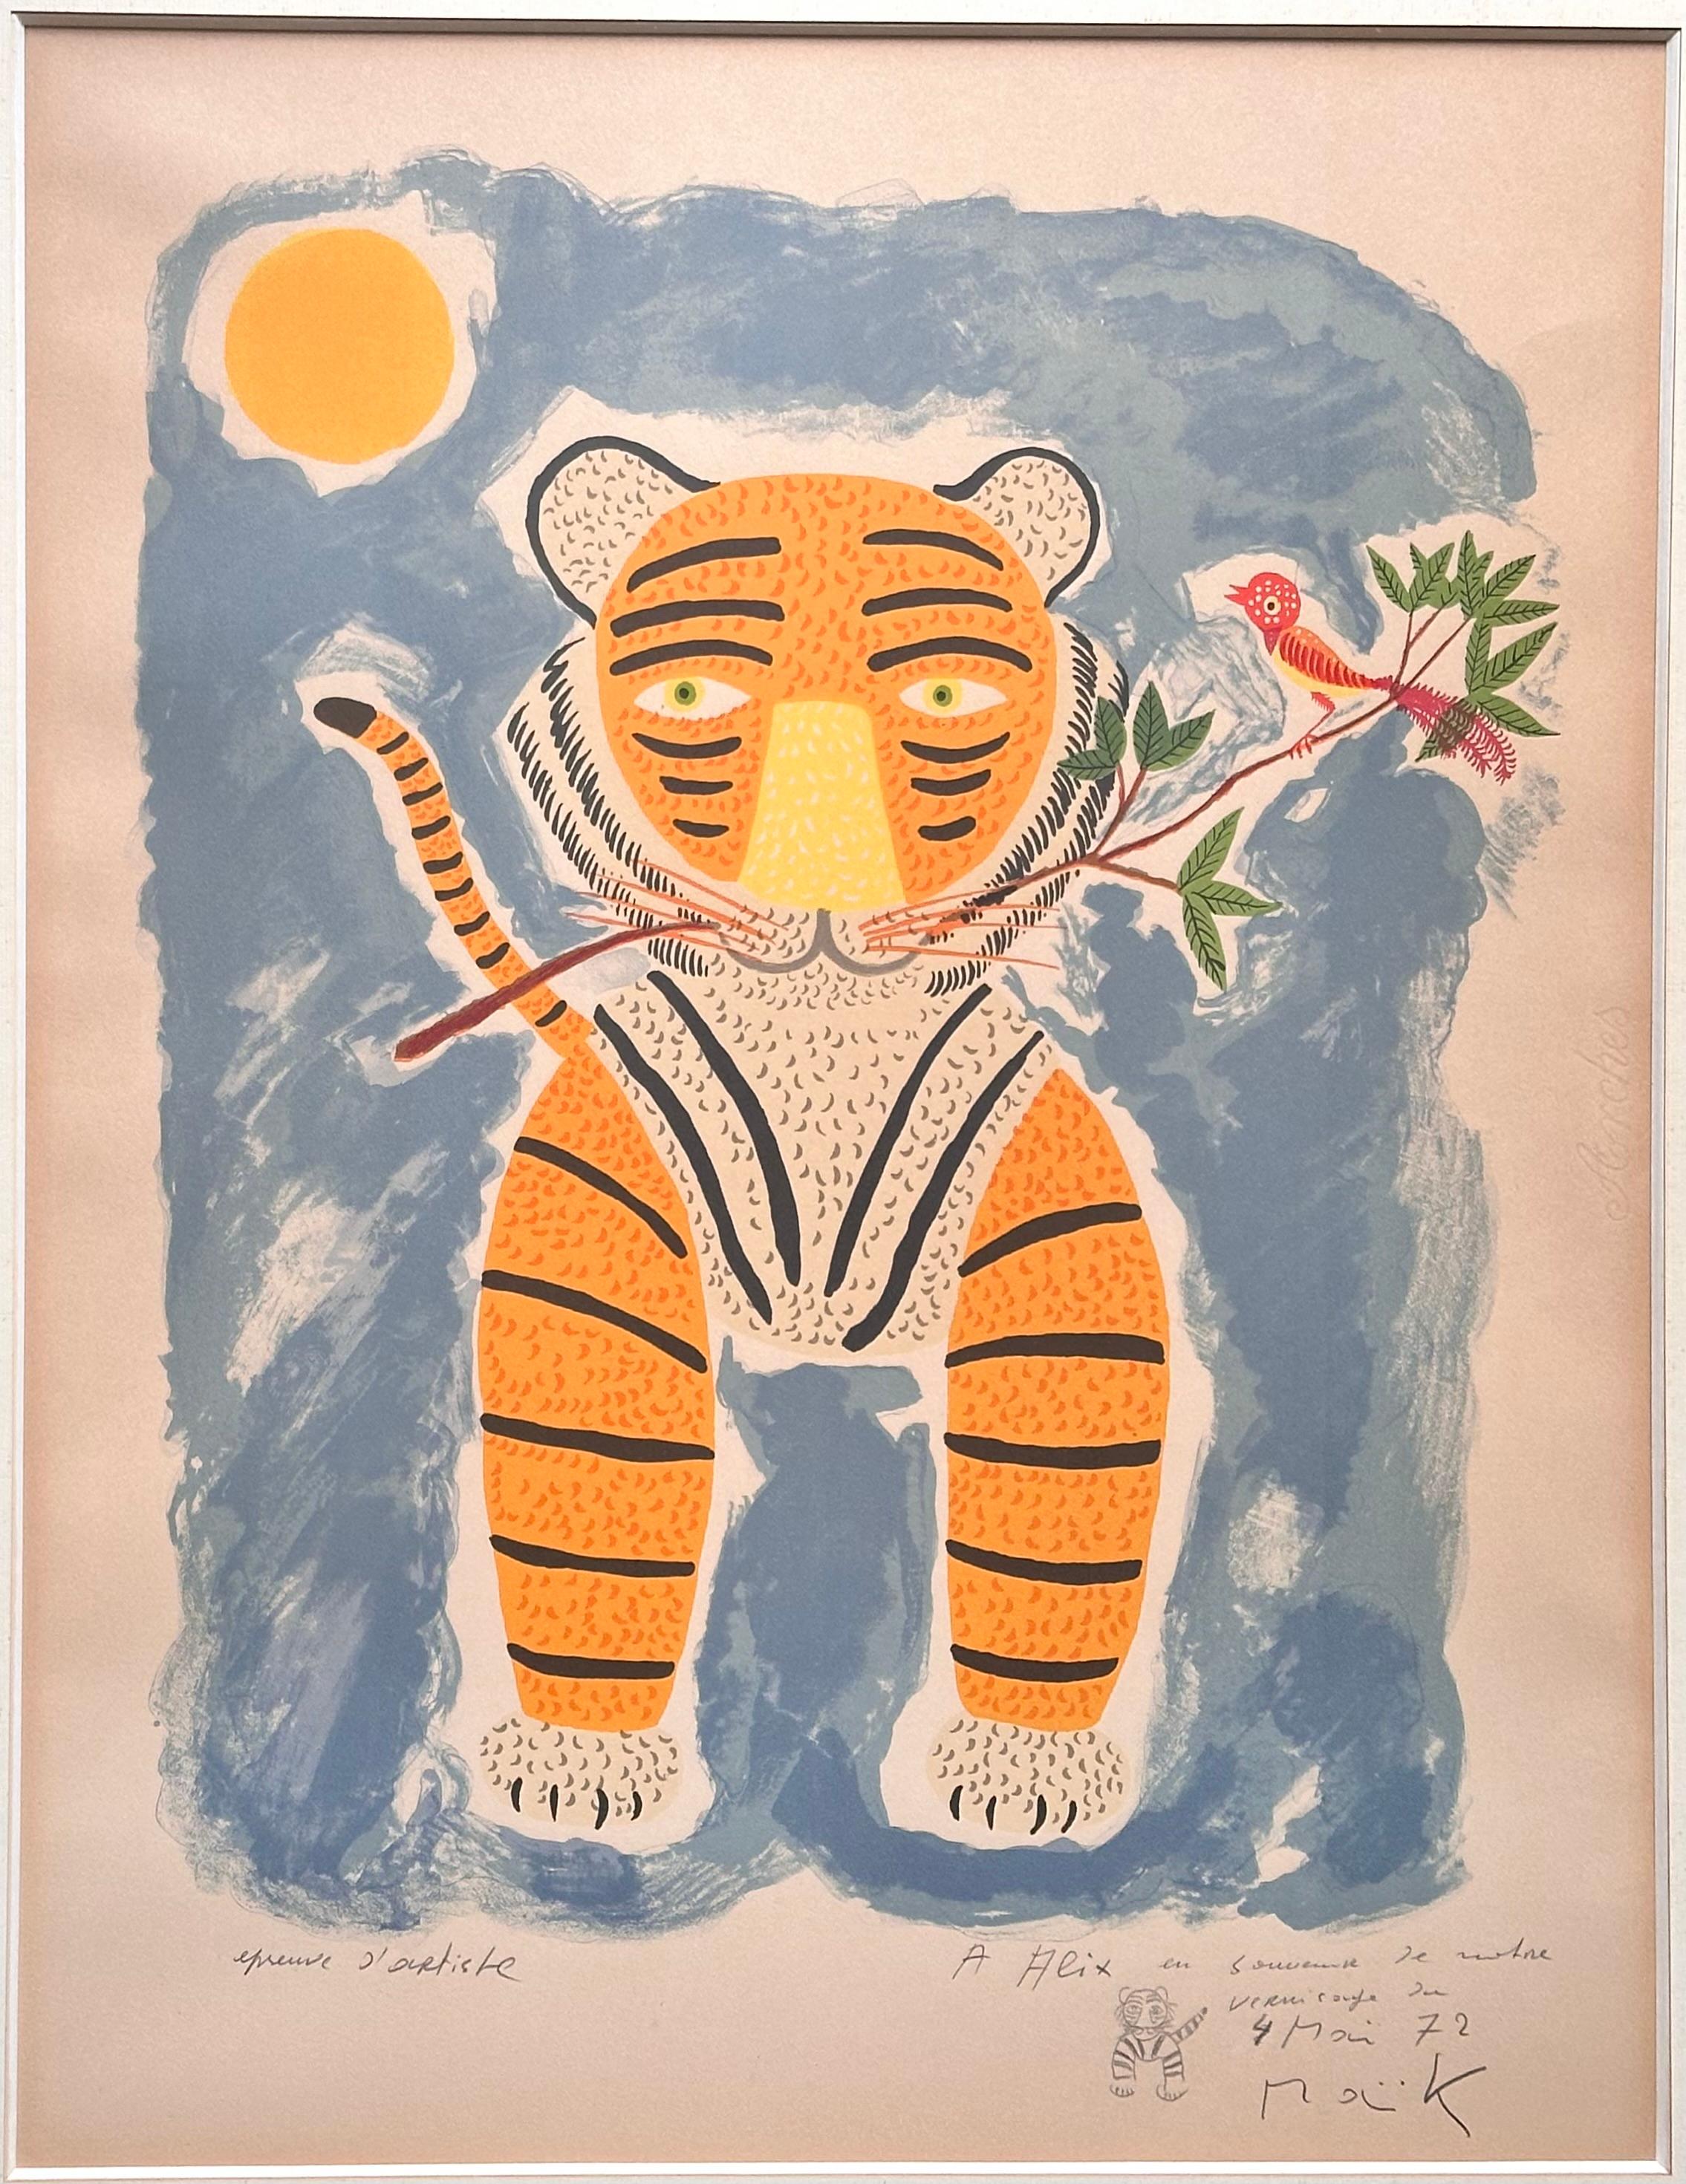 Henri Hecht MAÏK (1922-1993) French painter 
Lithograph « The Tiger » from 1972

Signed rare artist’s proof on wove paper.

A small tiger is drawn lower right with pencil
with a dedication, date and signature:
« A Alix en souvenir de notre